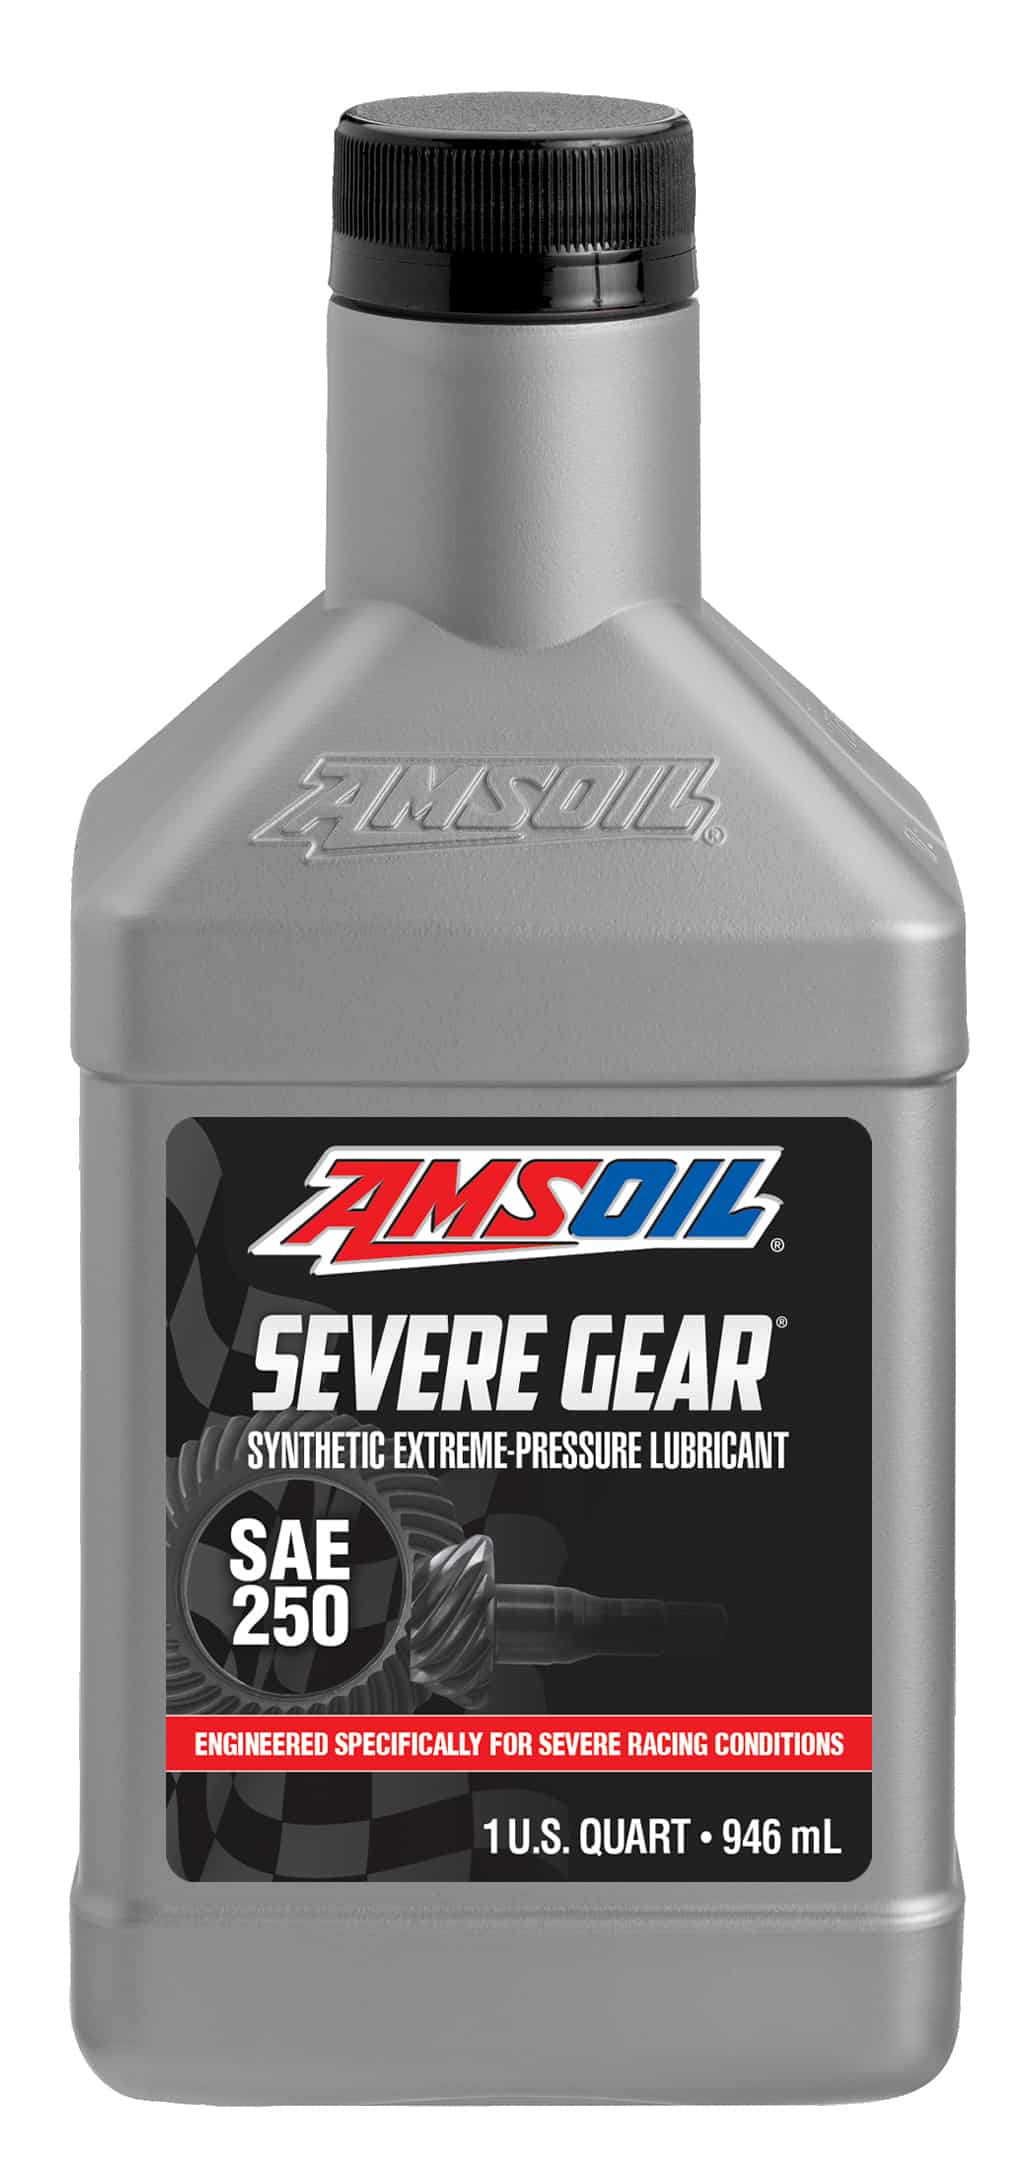 A bottle of AMSOIL SEVERE Synthetic Racing Gear Lubricant , designed to offer peace of mind. It protects costly, high-performance racing machines in the toughest conditions.